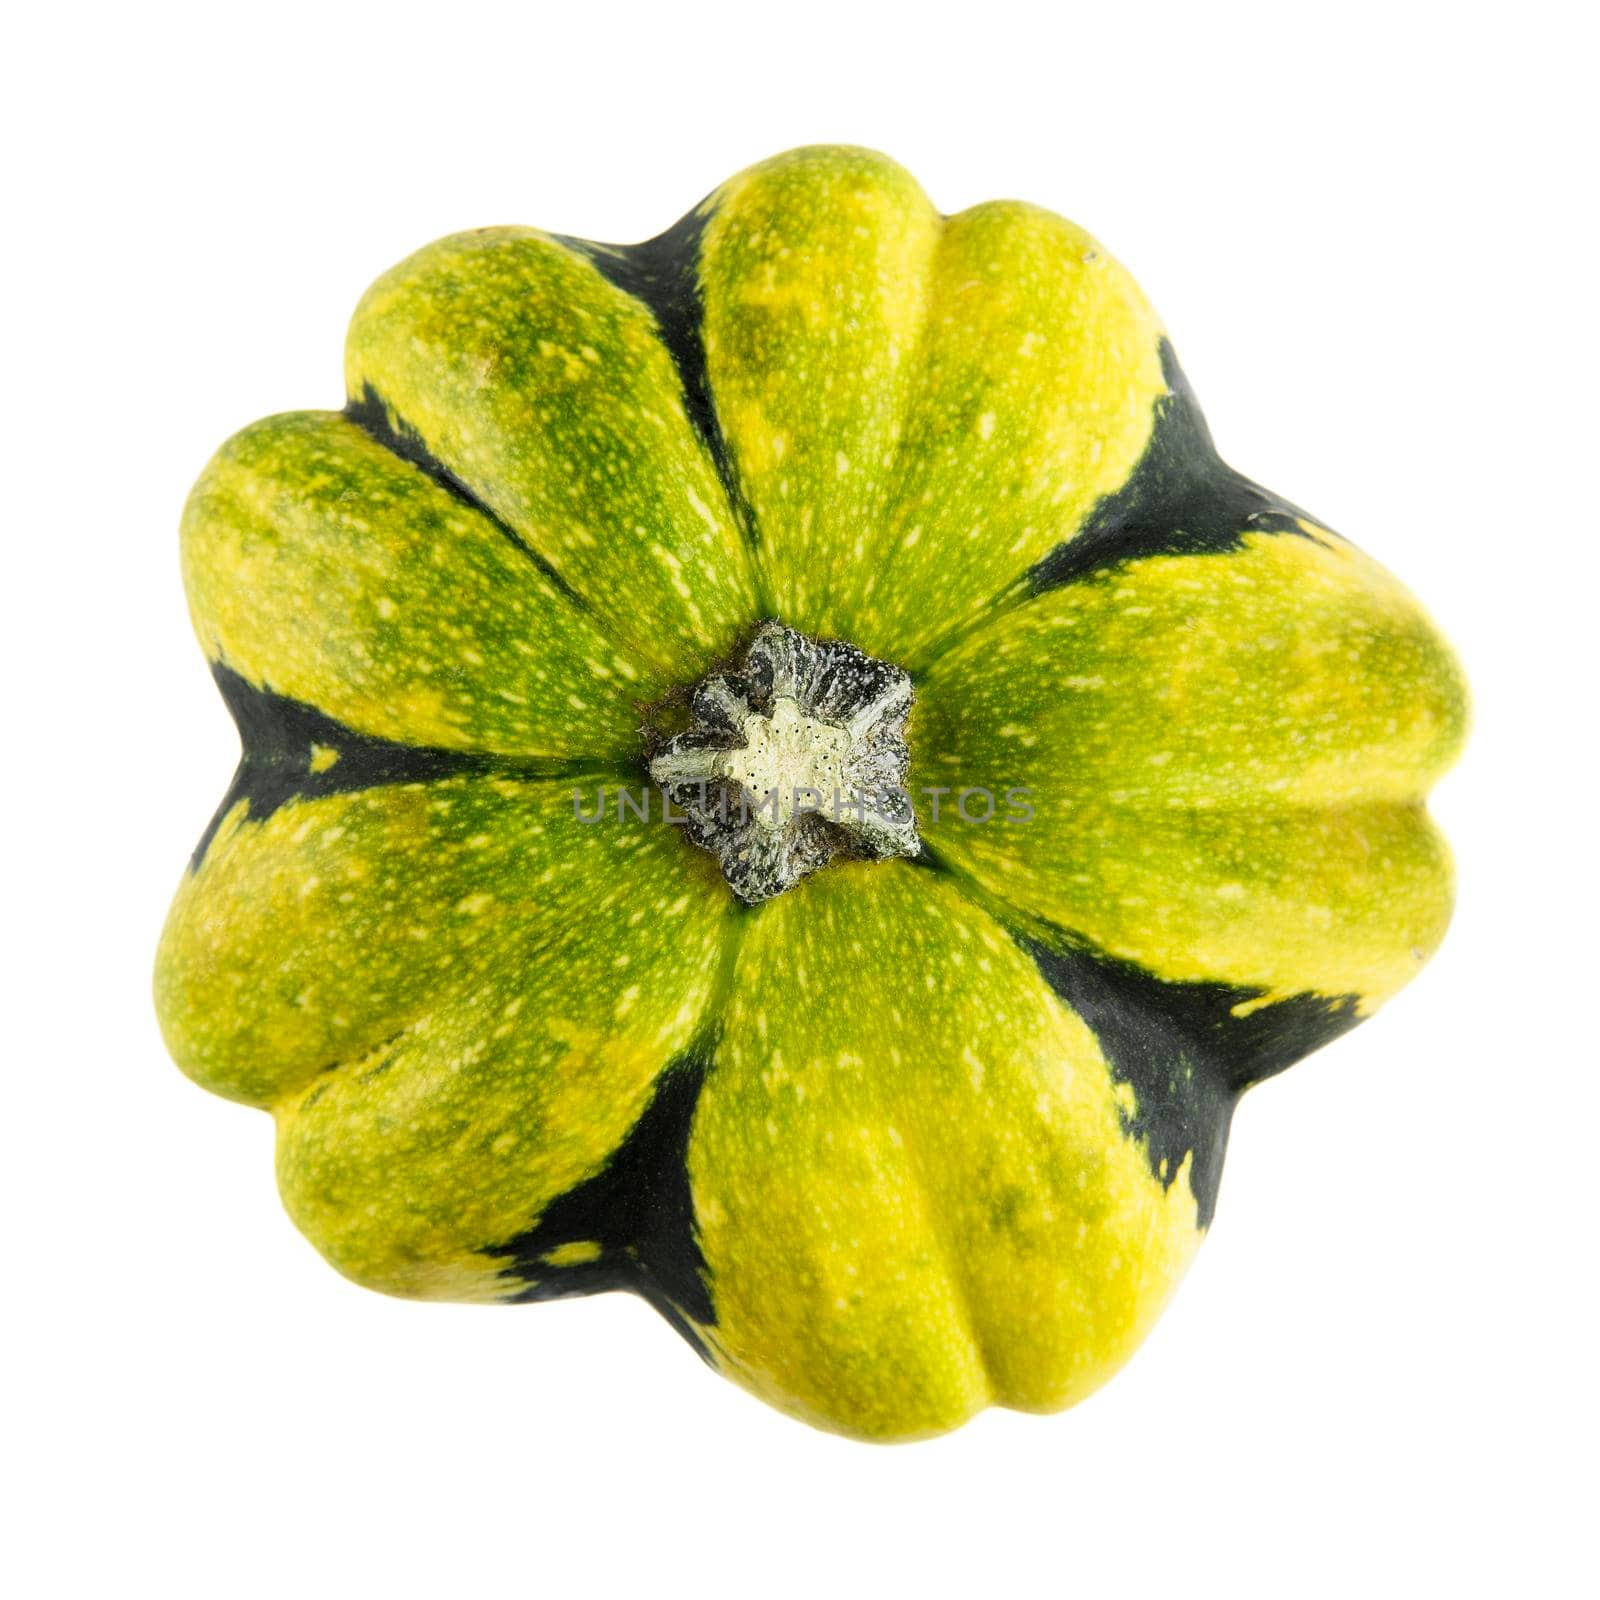 Autumn gourd viewed from above and isolated on a white background